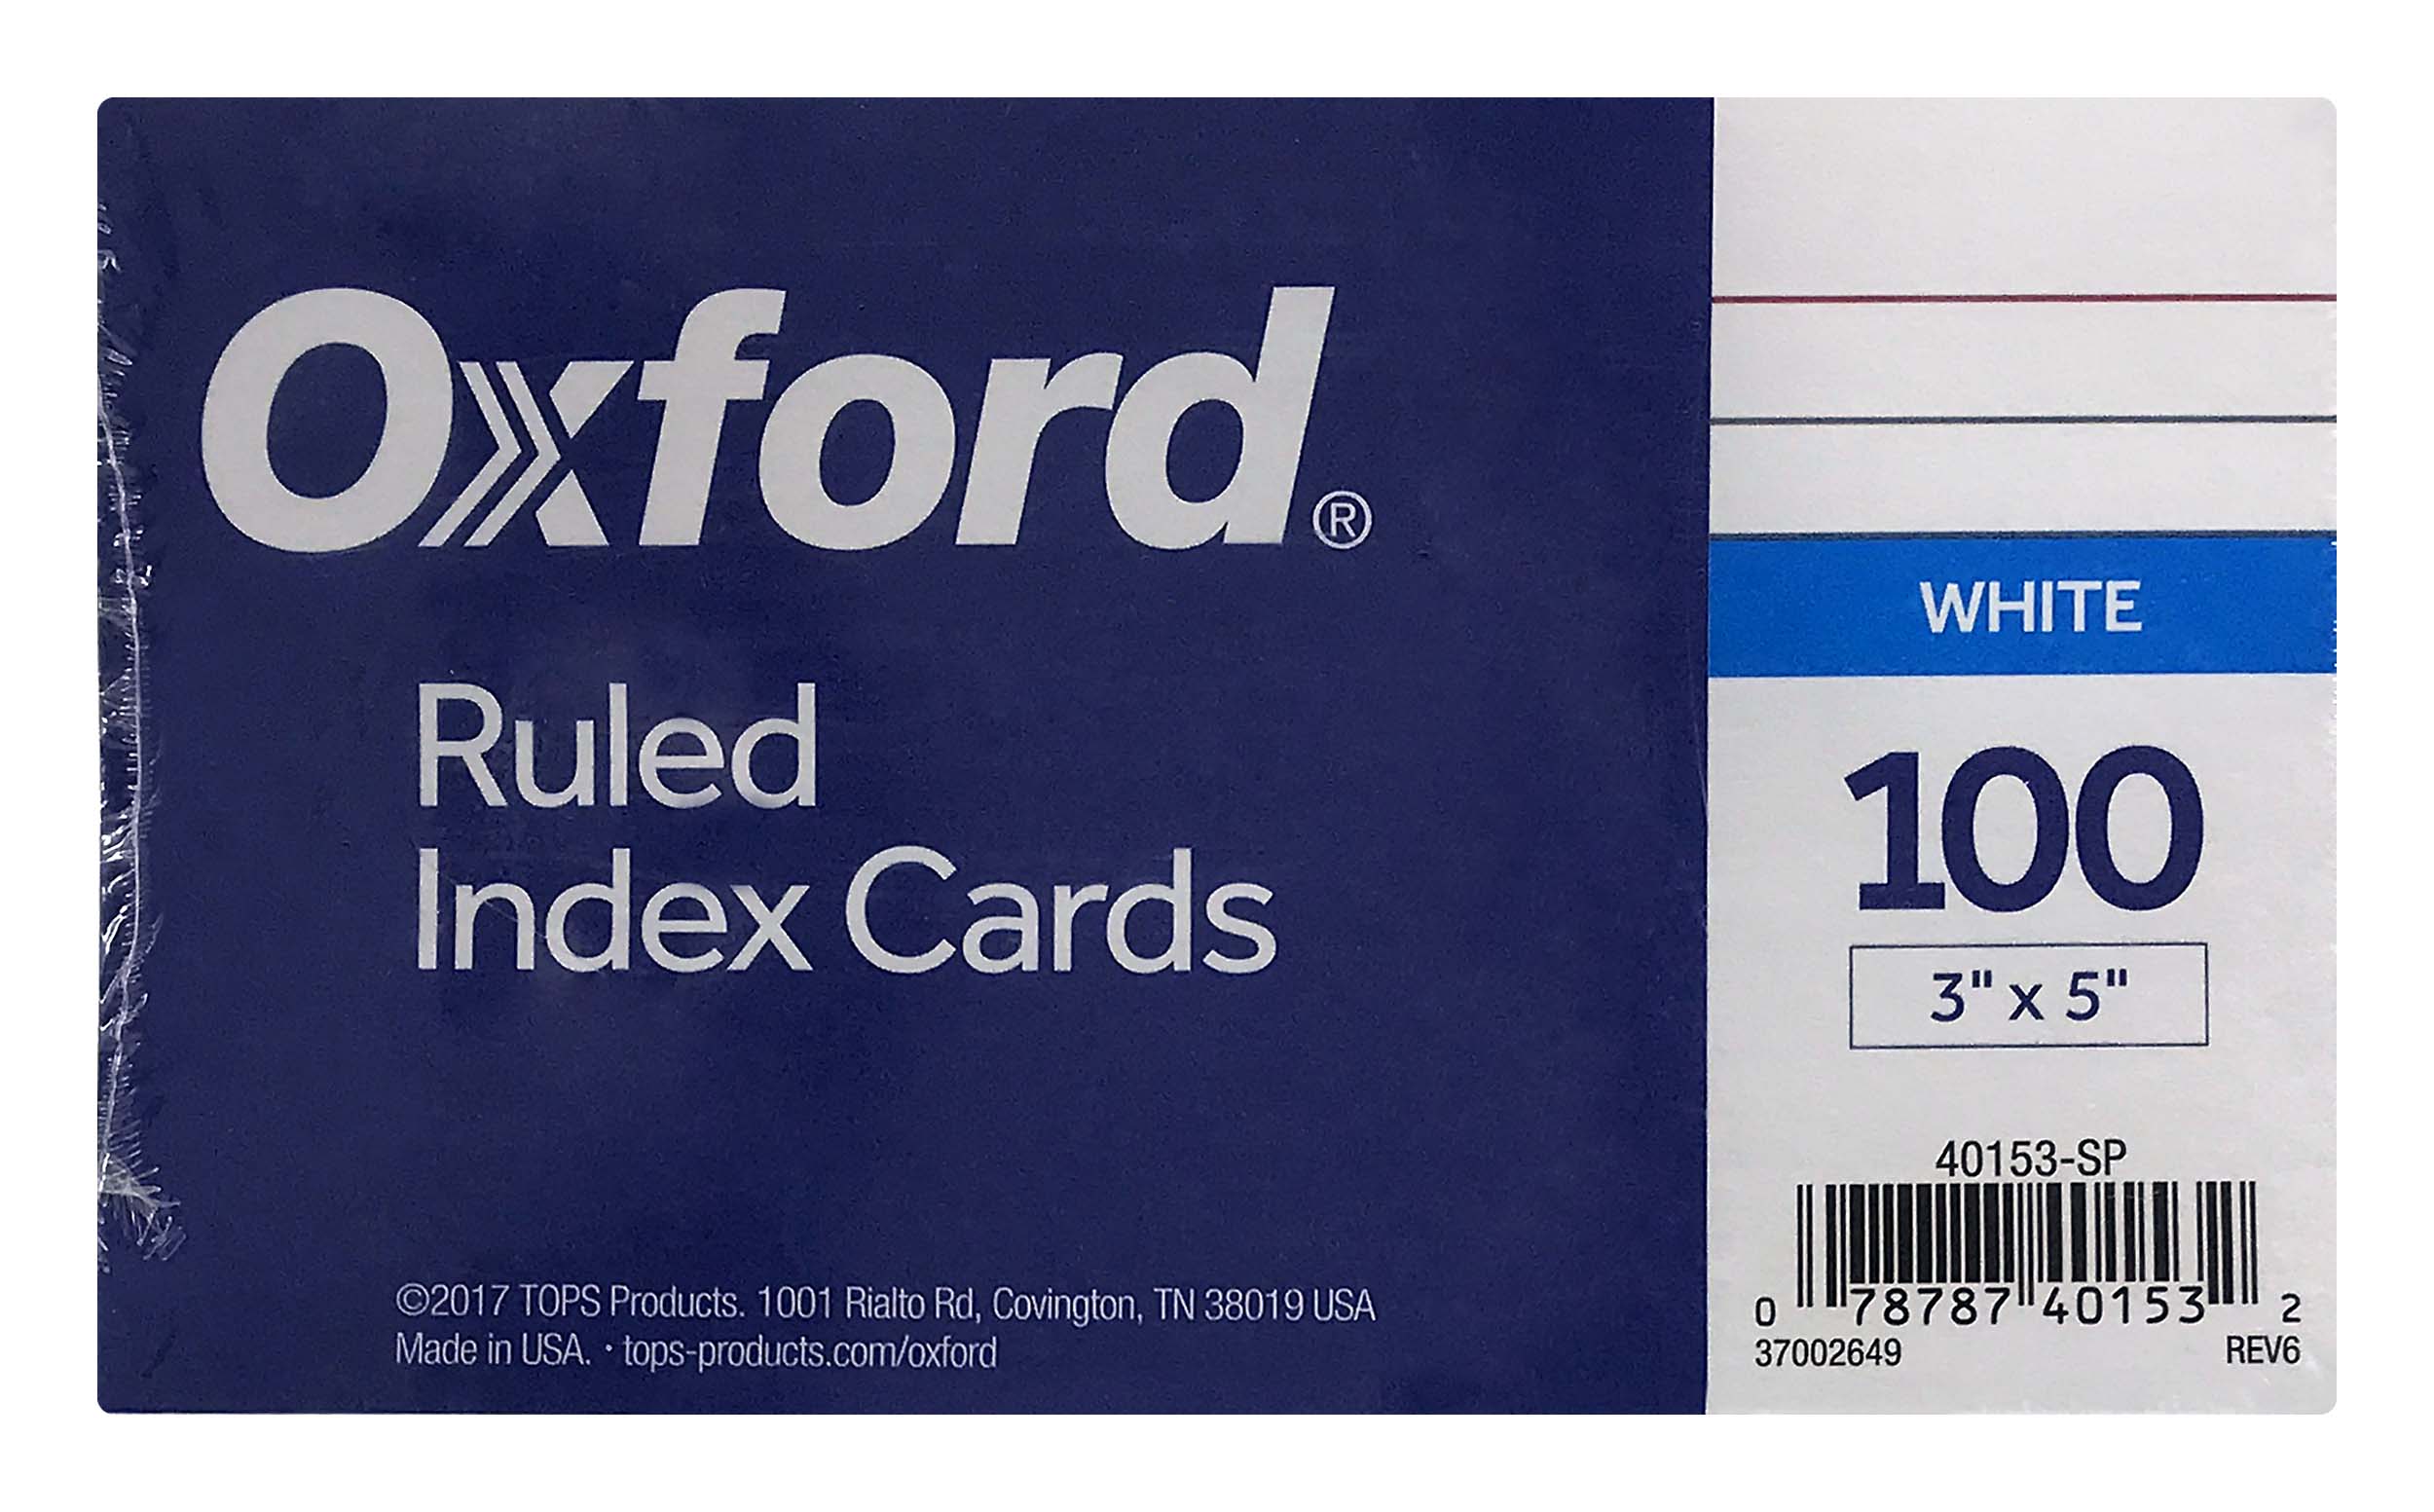 3X5 RULED INDEX CARDS